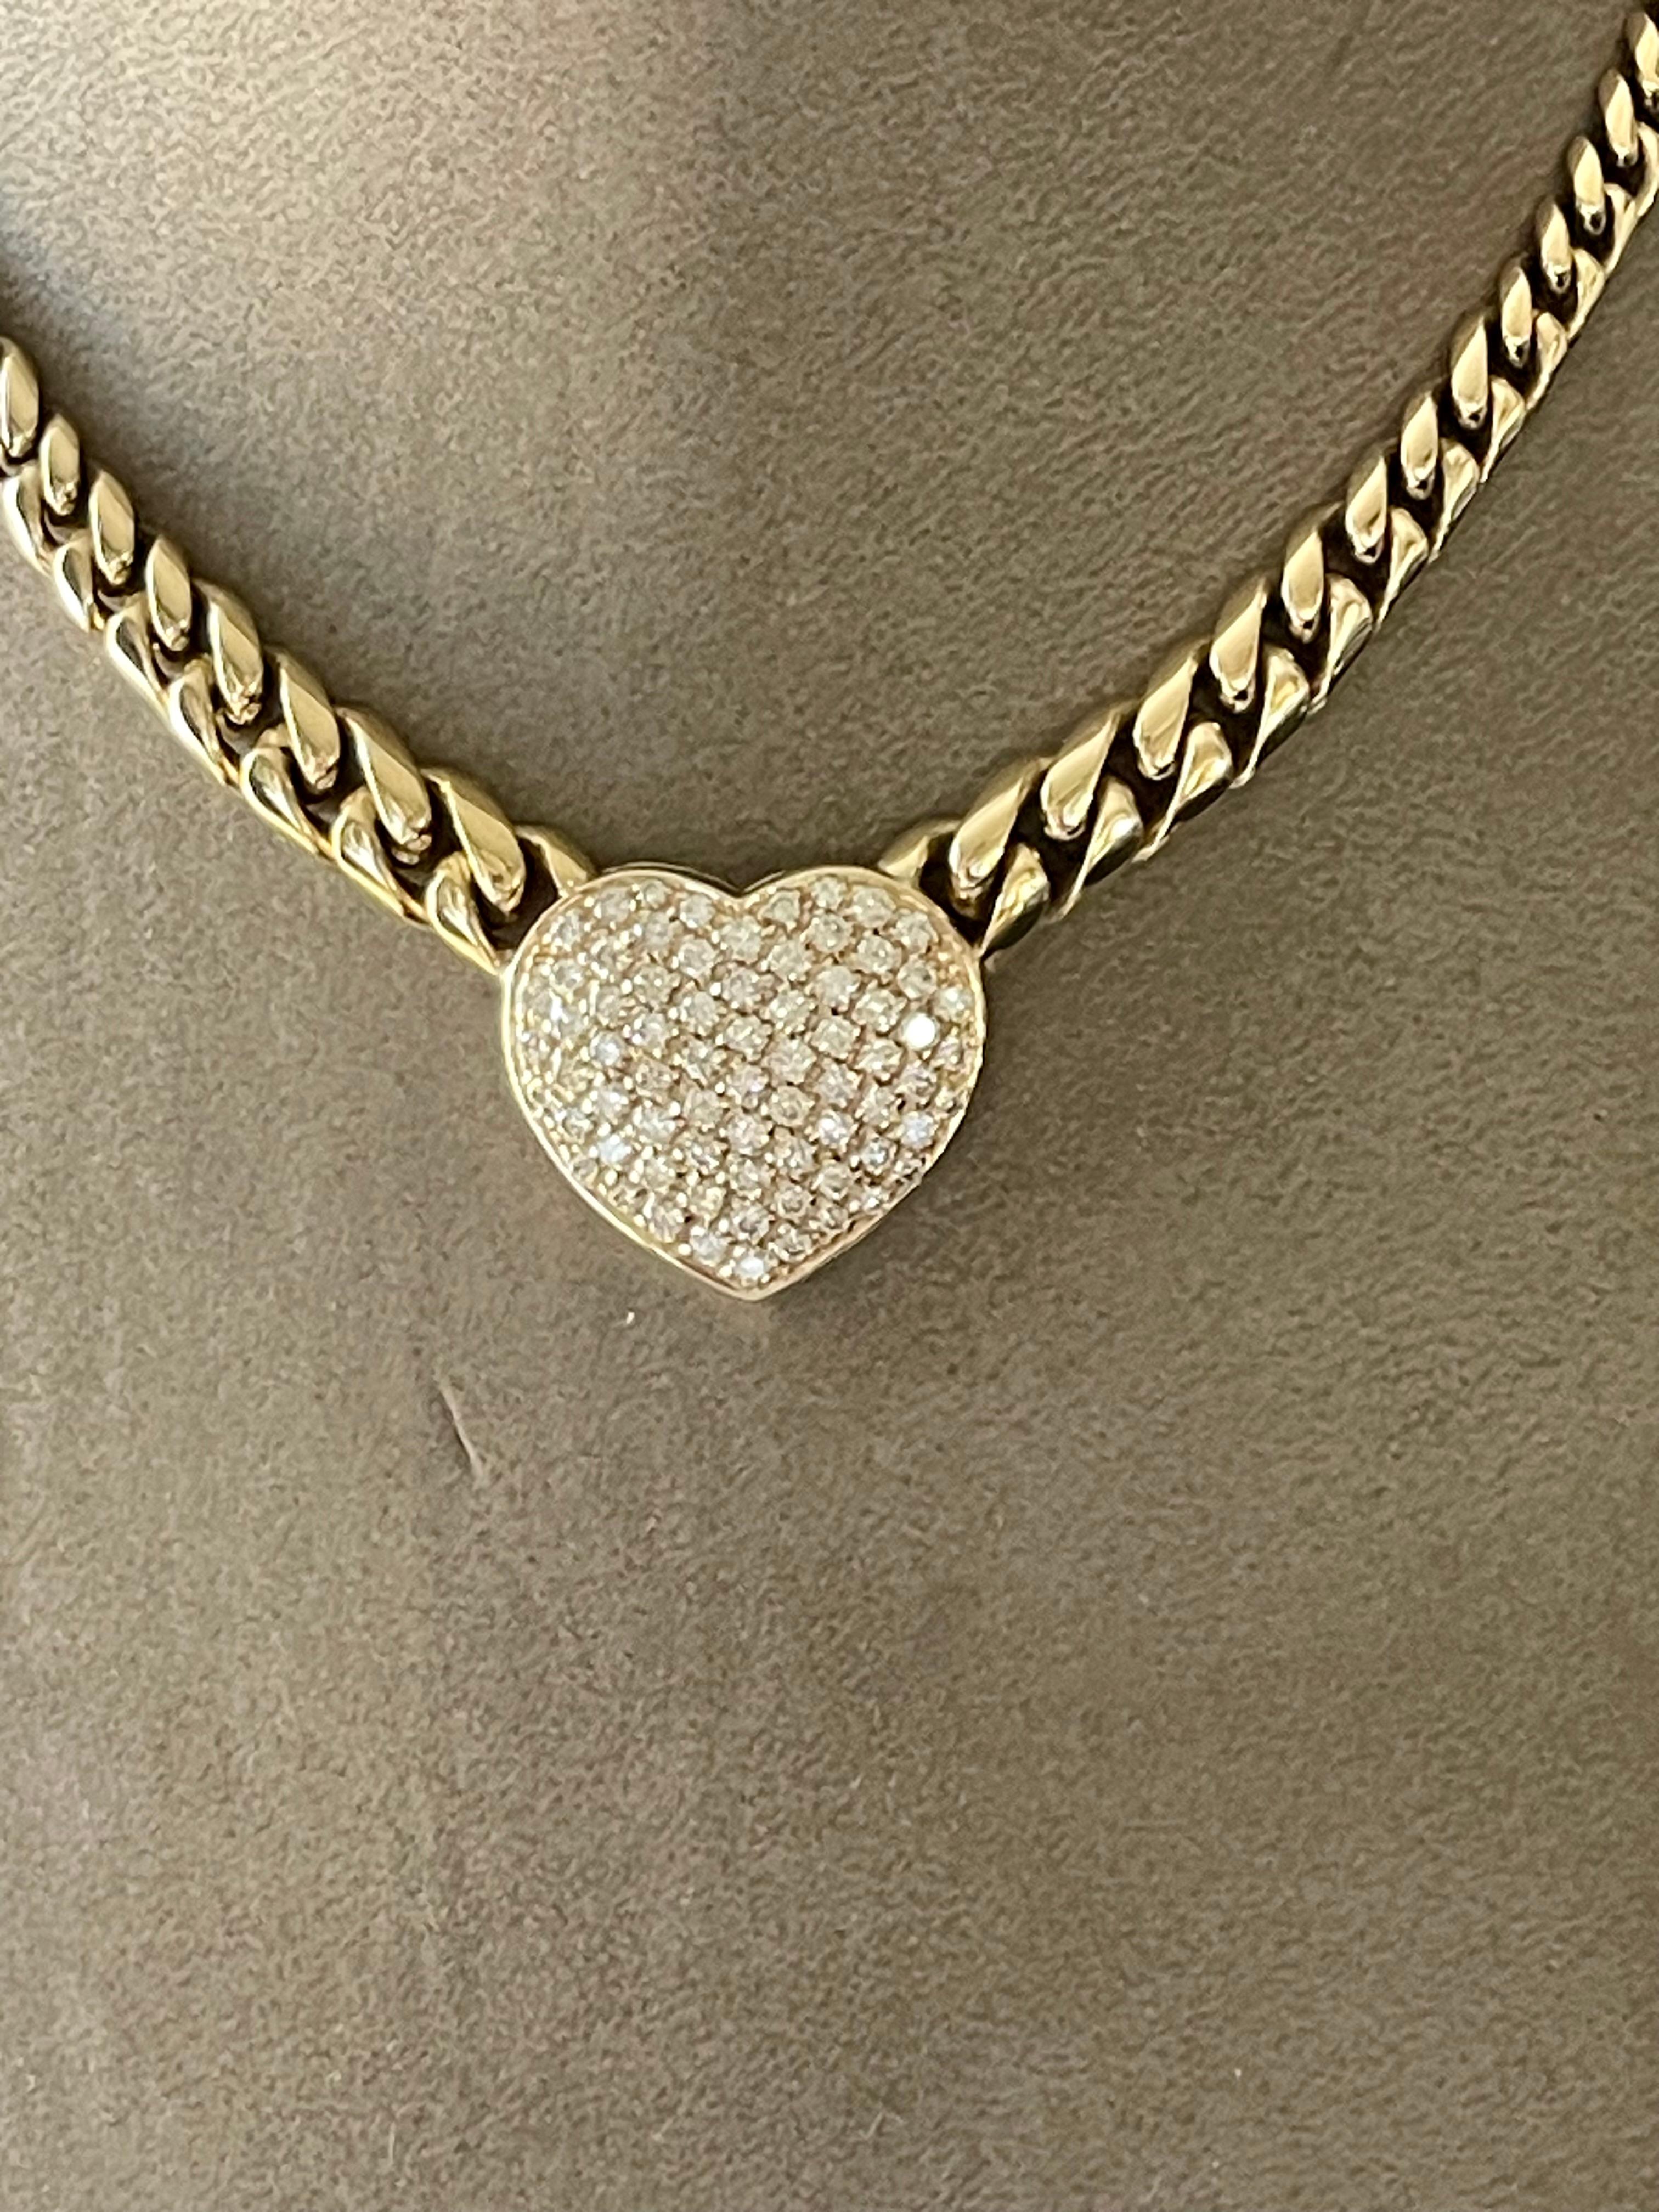 A timeless and solid 18 K yellow Gold Cuban link Necklace featuring a pave set Diamond heart pendant. This stylish necklace features approximately 2.50 ct of fine white brilliant cut Diamonds, G color, vs clarity. 
Lenght: 42 cm.
Weight: 53.41